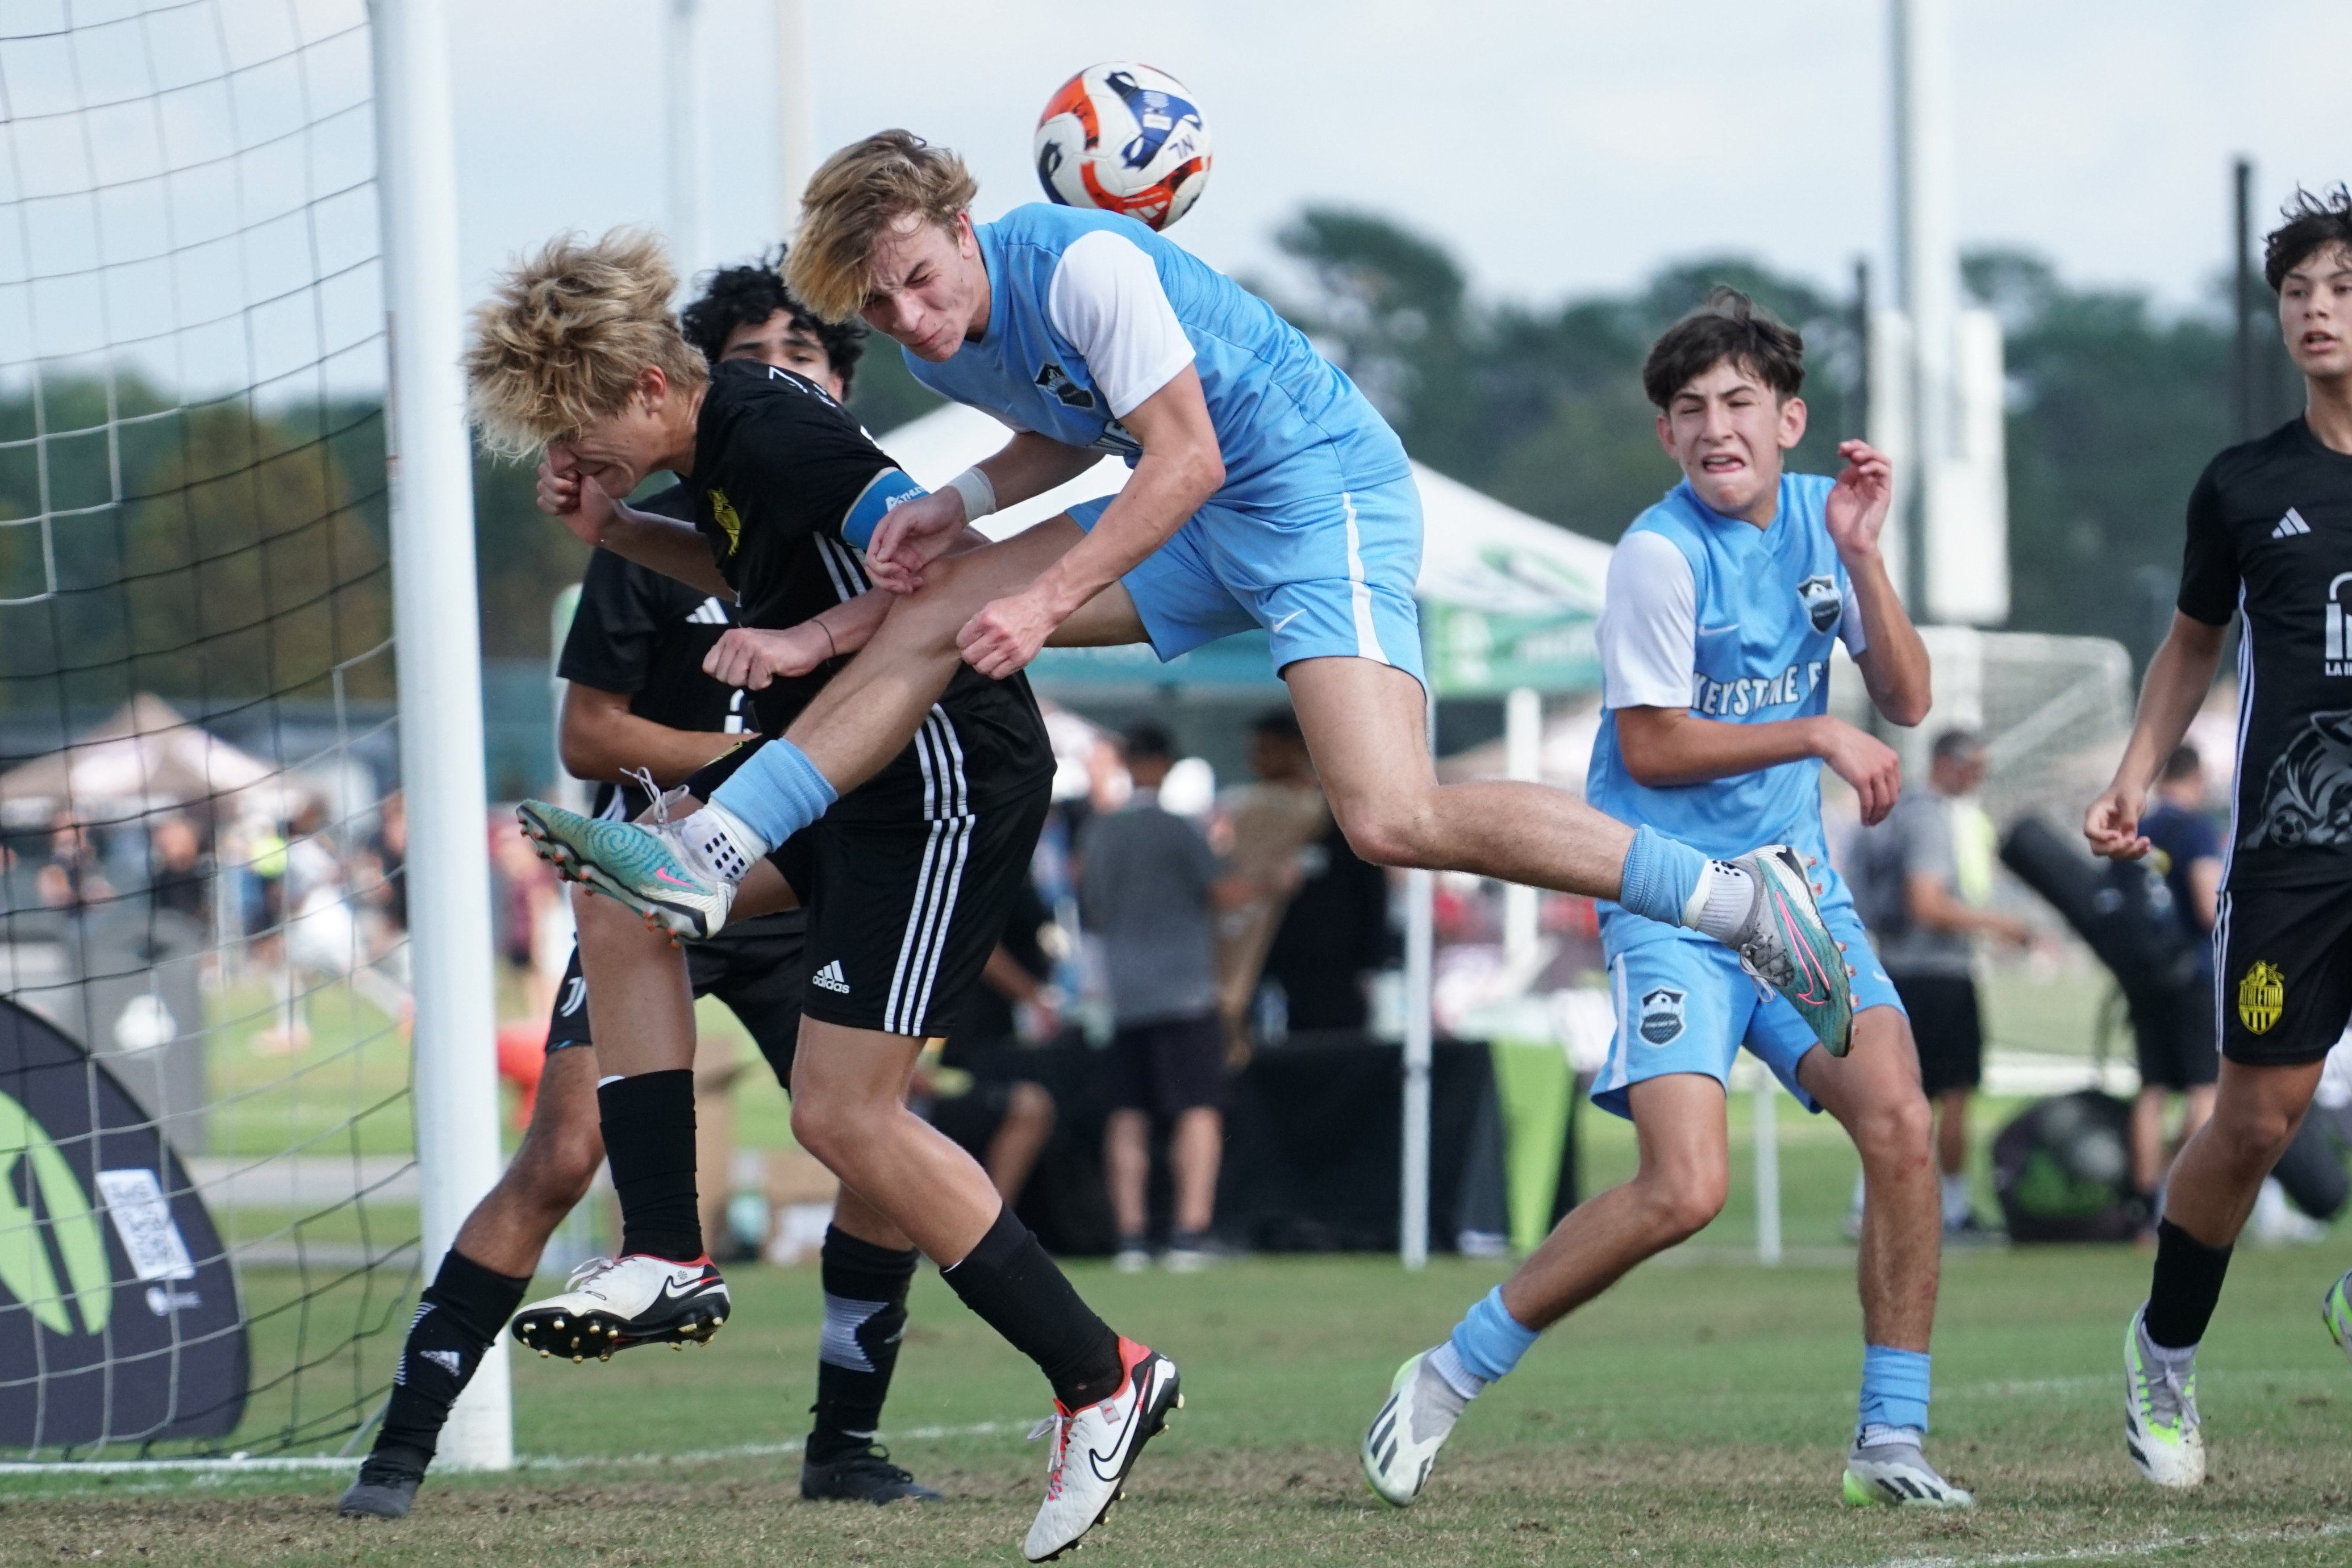 USYS National League Conference Playoffs